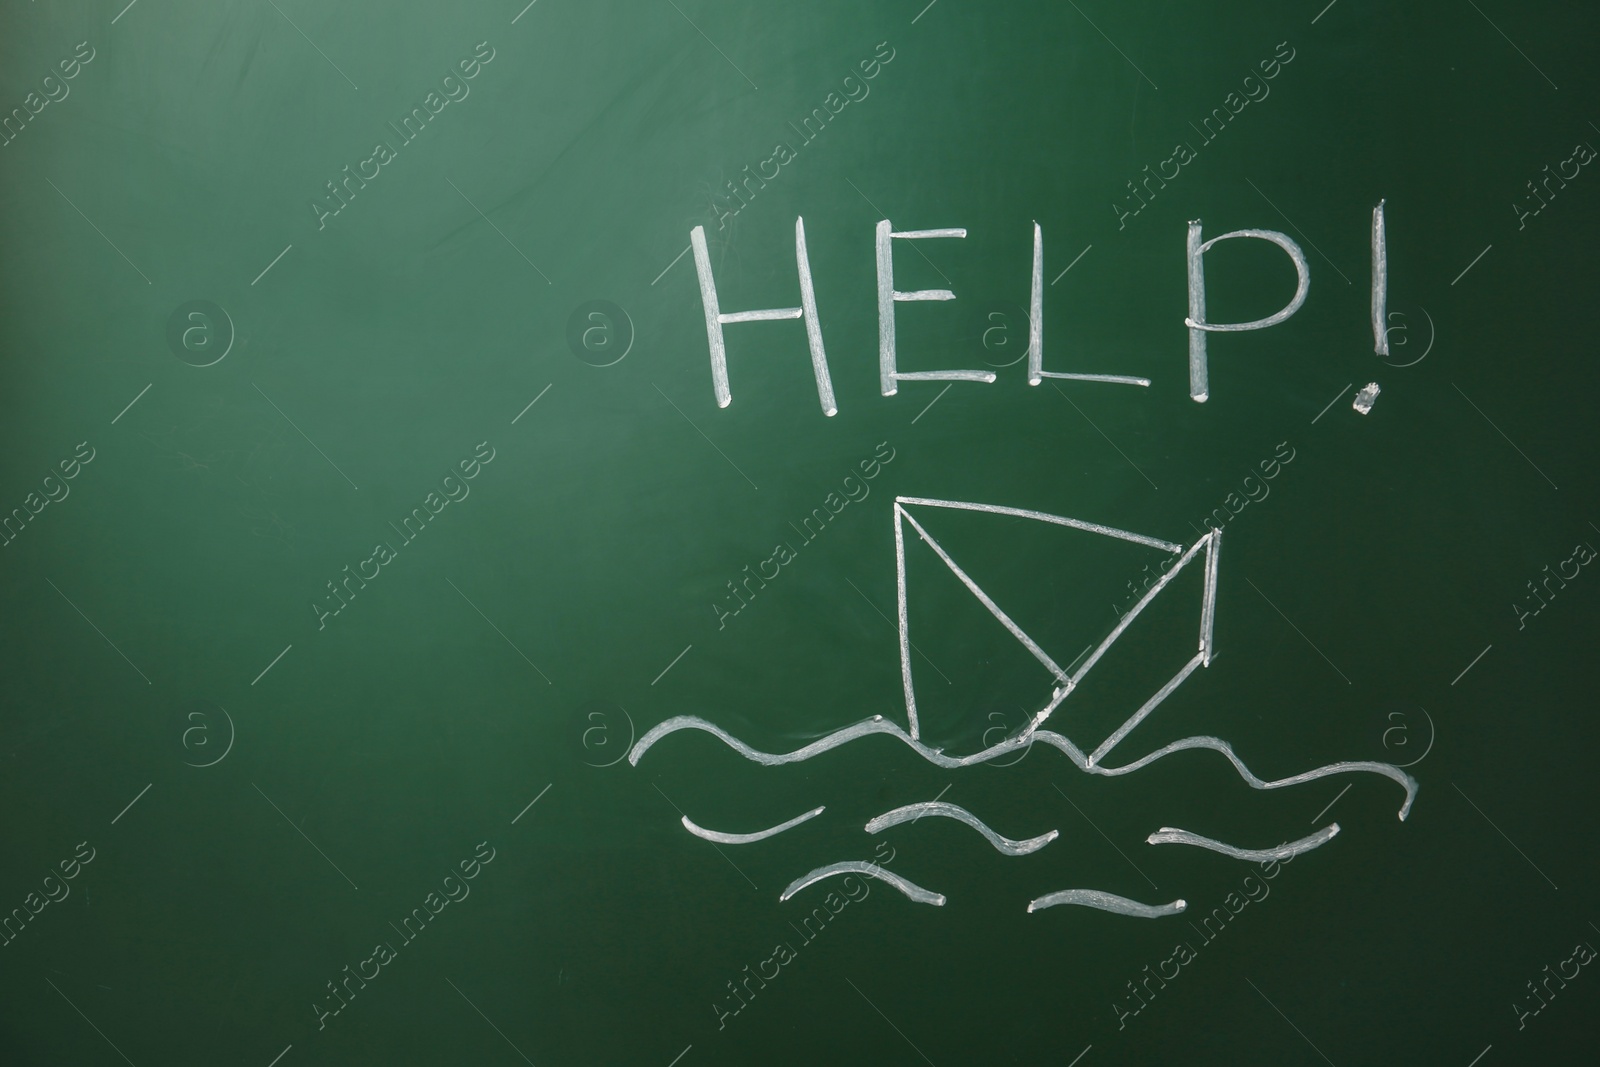 Photo of Drawing of sinking boat and word "Help" on green chalkboard. Space for text